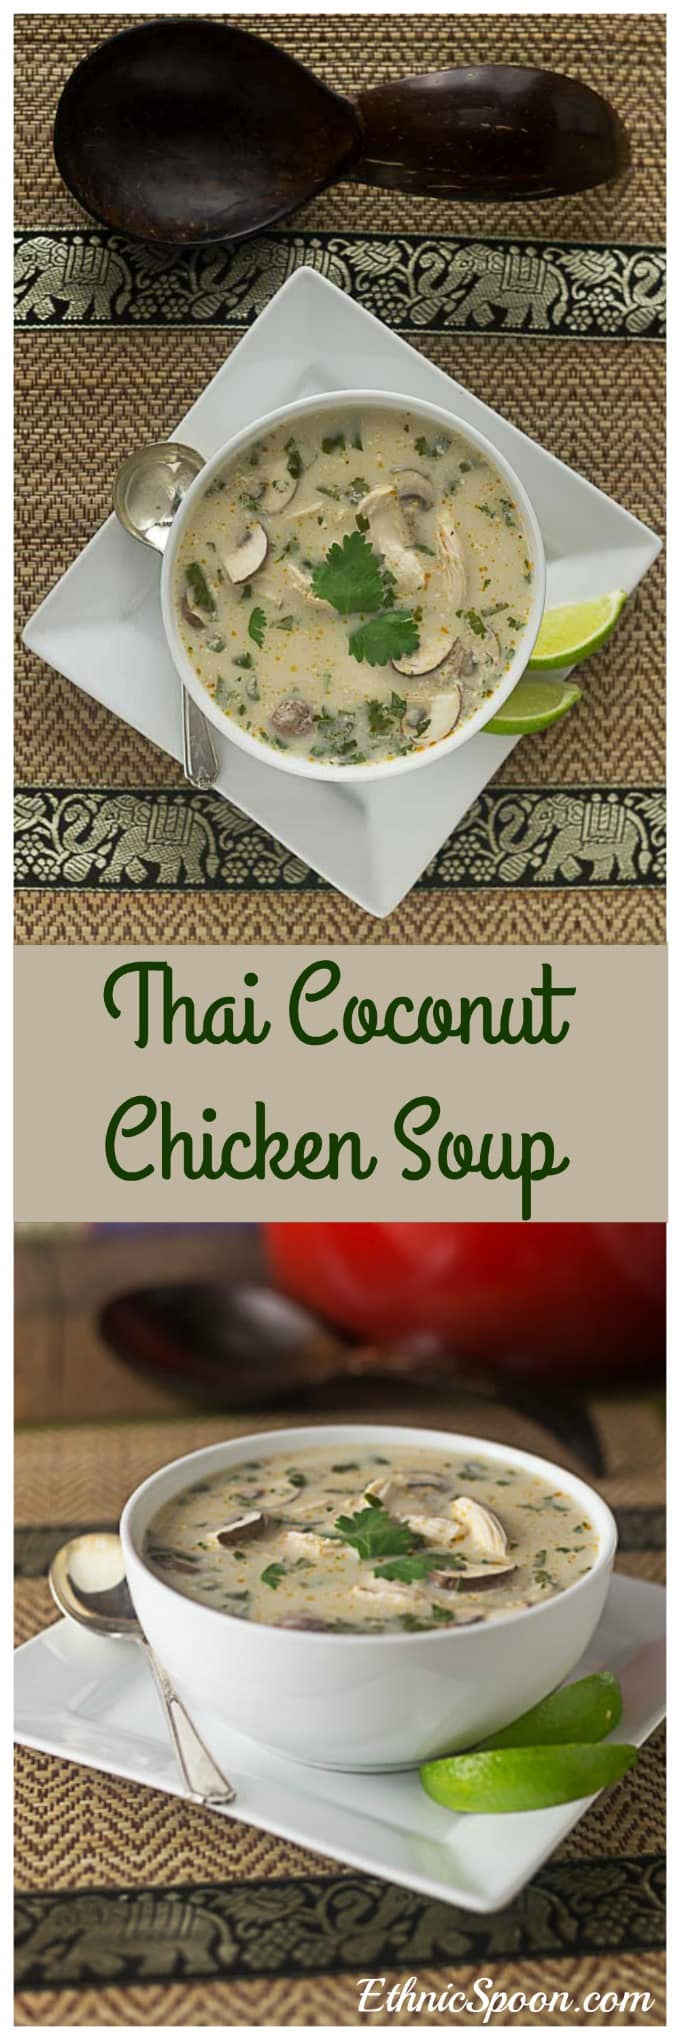 A sweet and savory Thai coconut chicken soup with a balance of flavors with mushrooms and lemon grass. | ethnicspoon.com